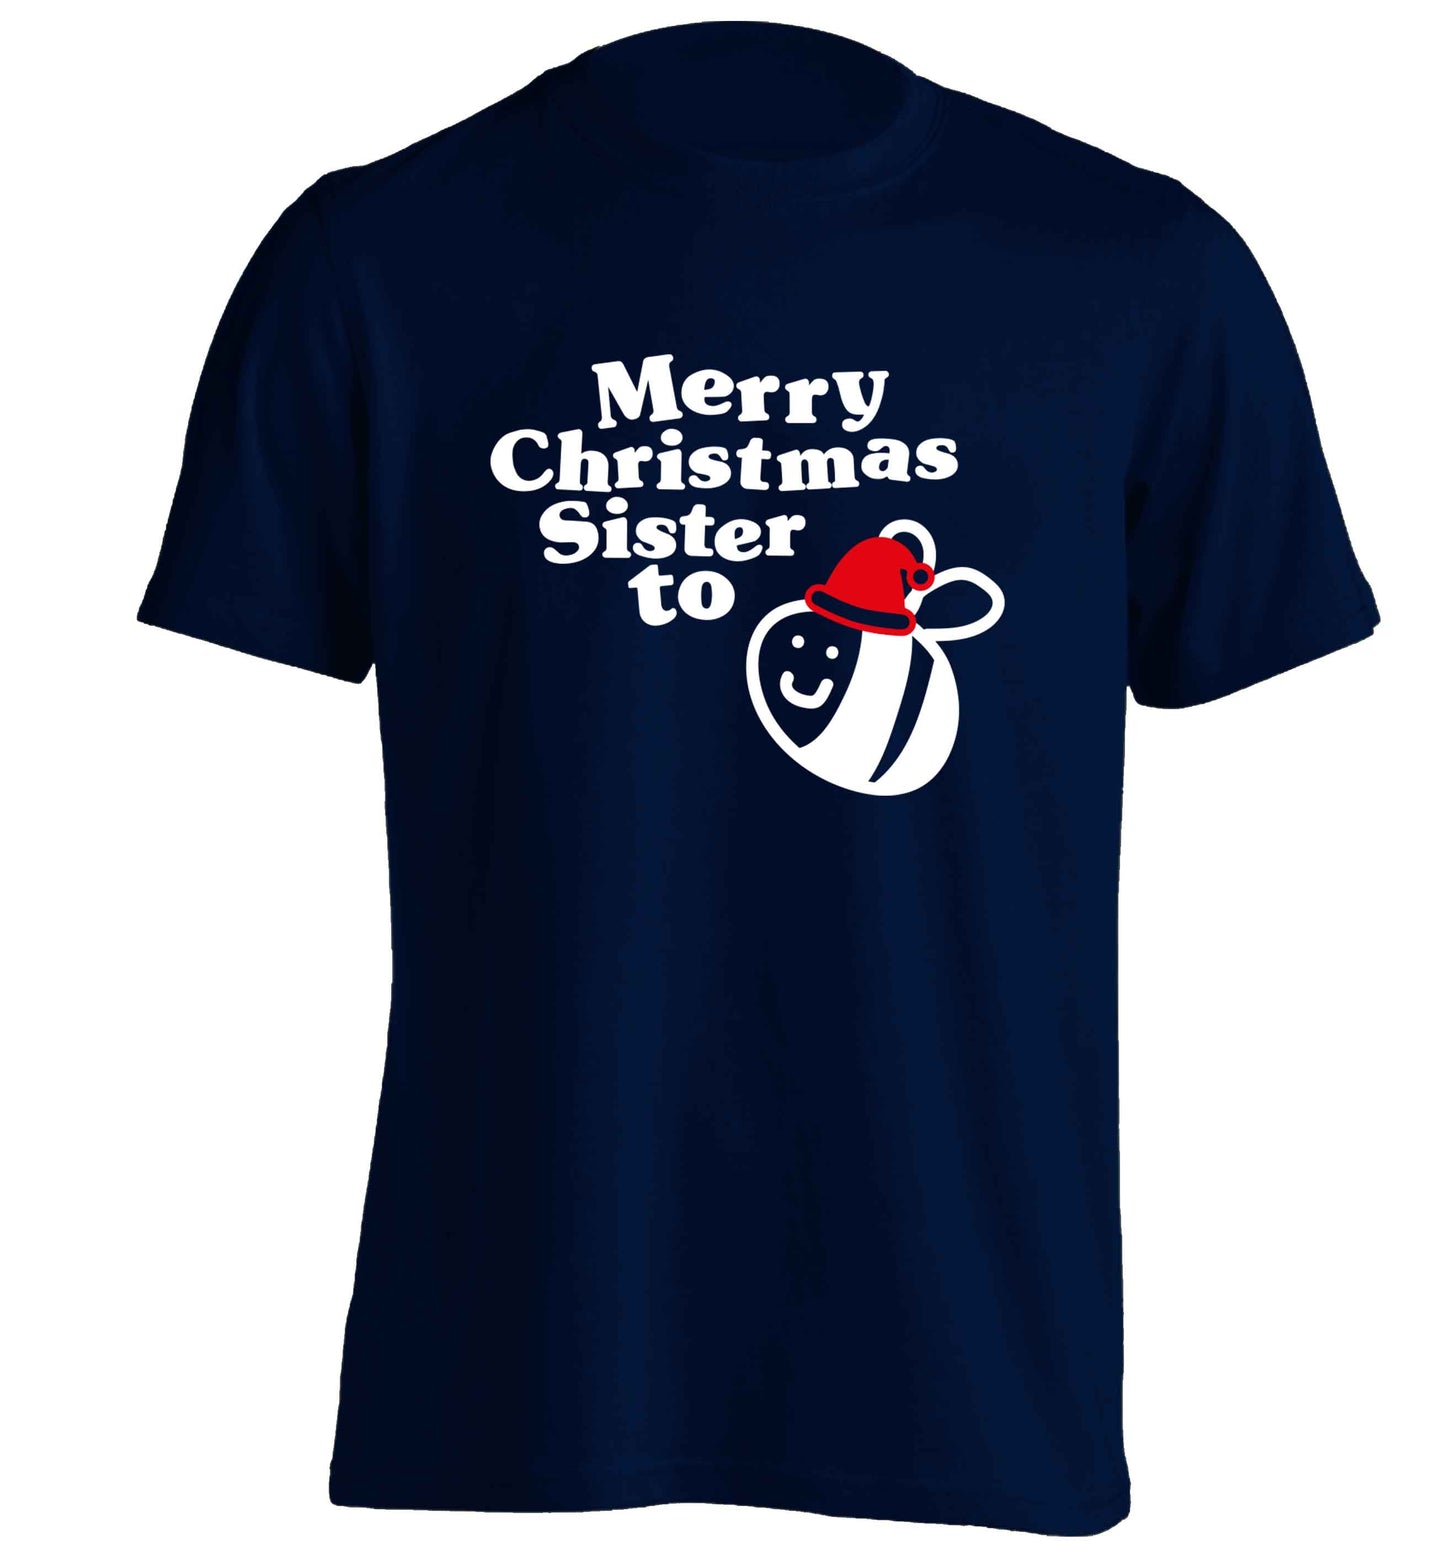 Merry Christmas sister to be adults unisex navy Tshirt 2XL